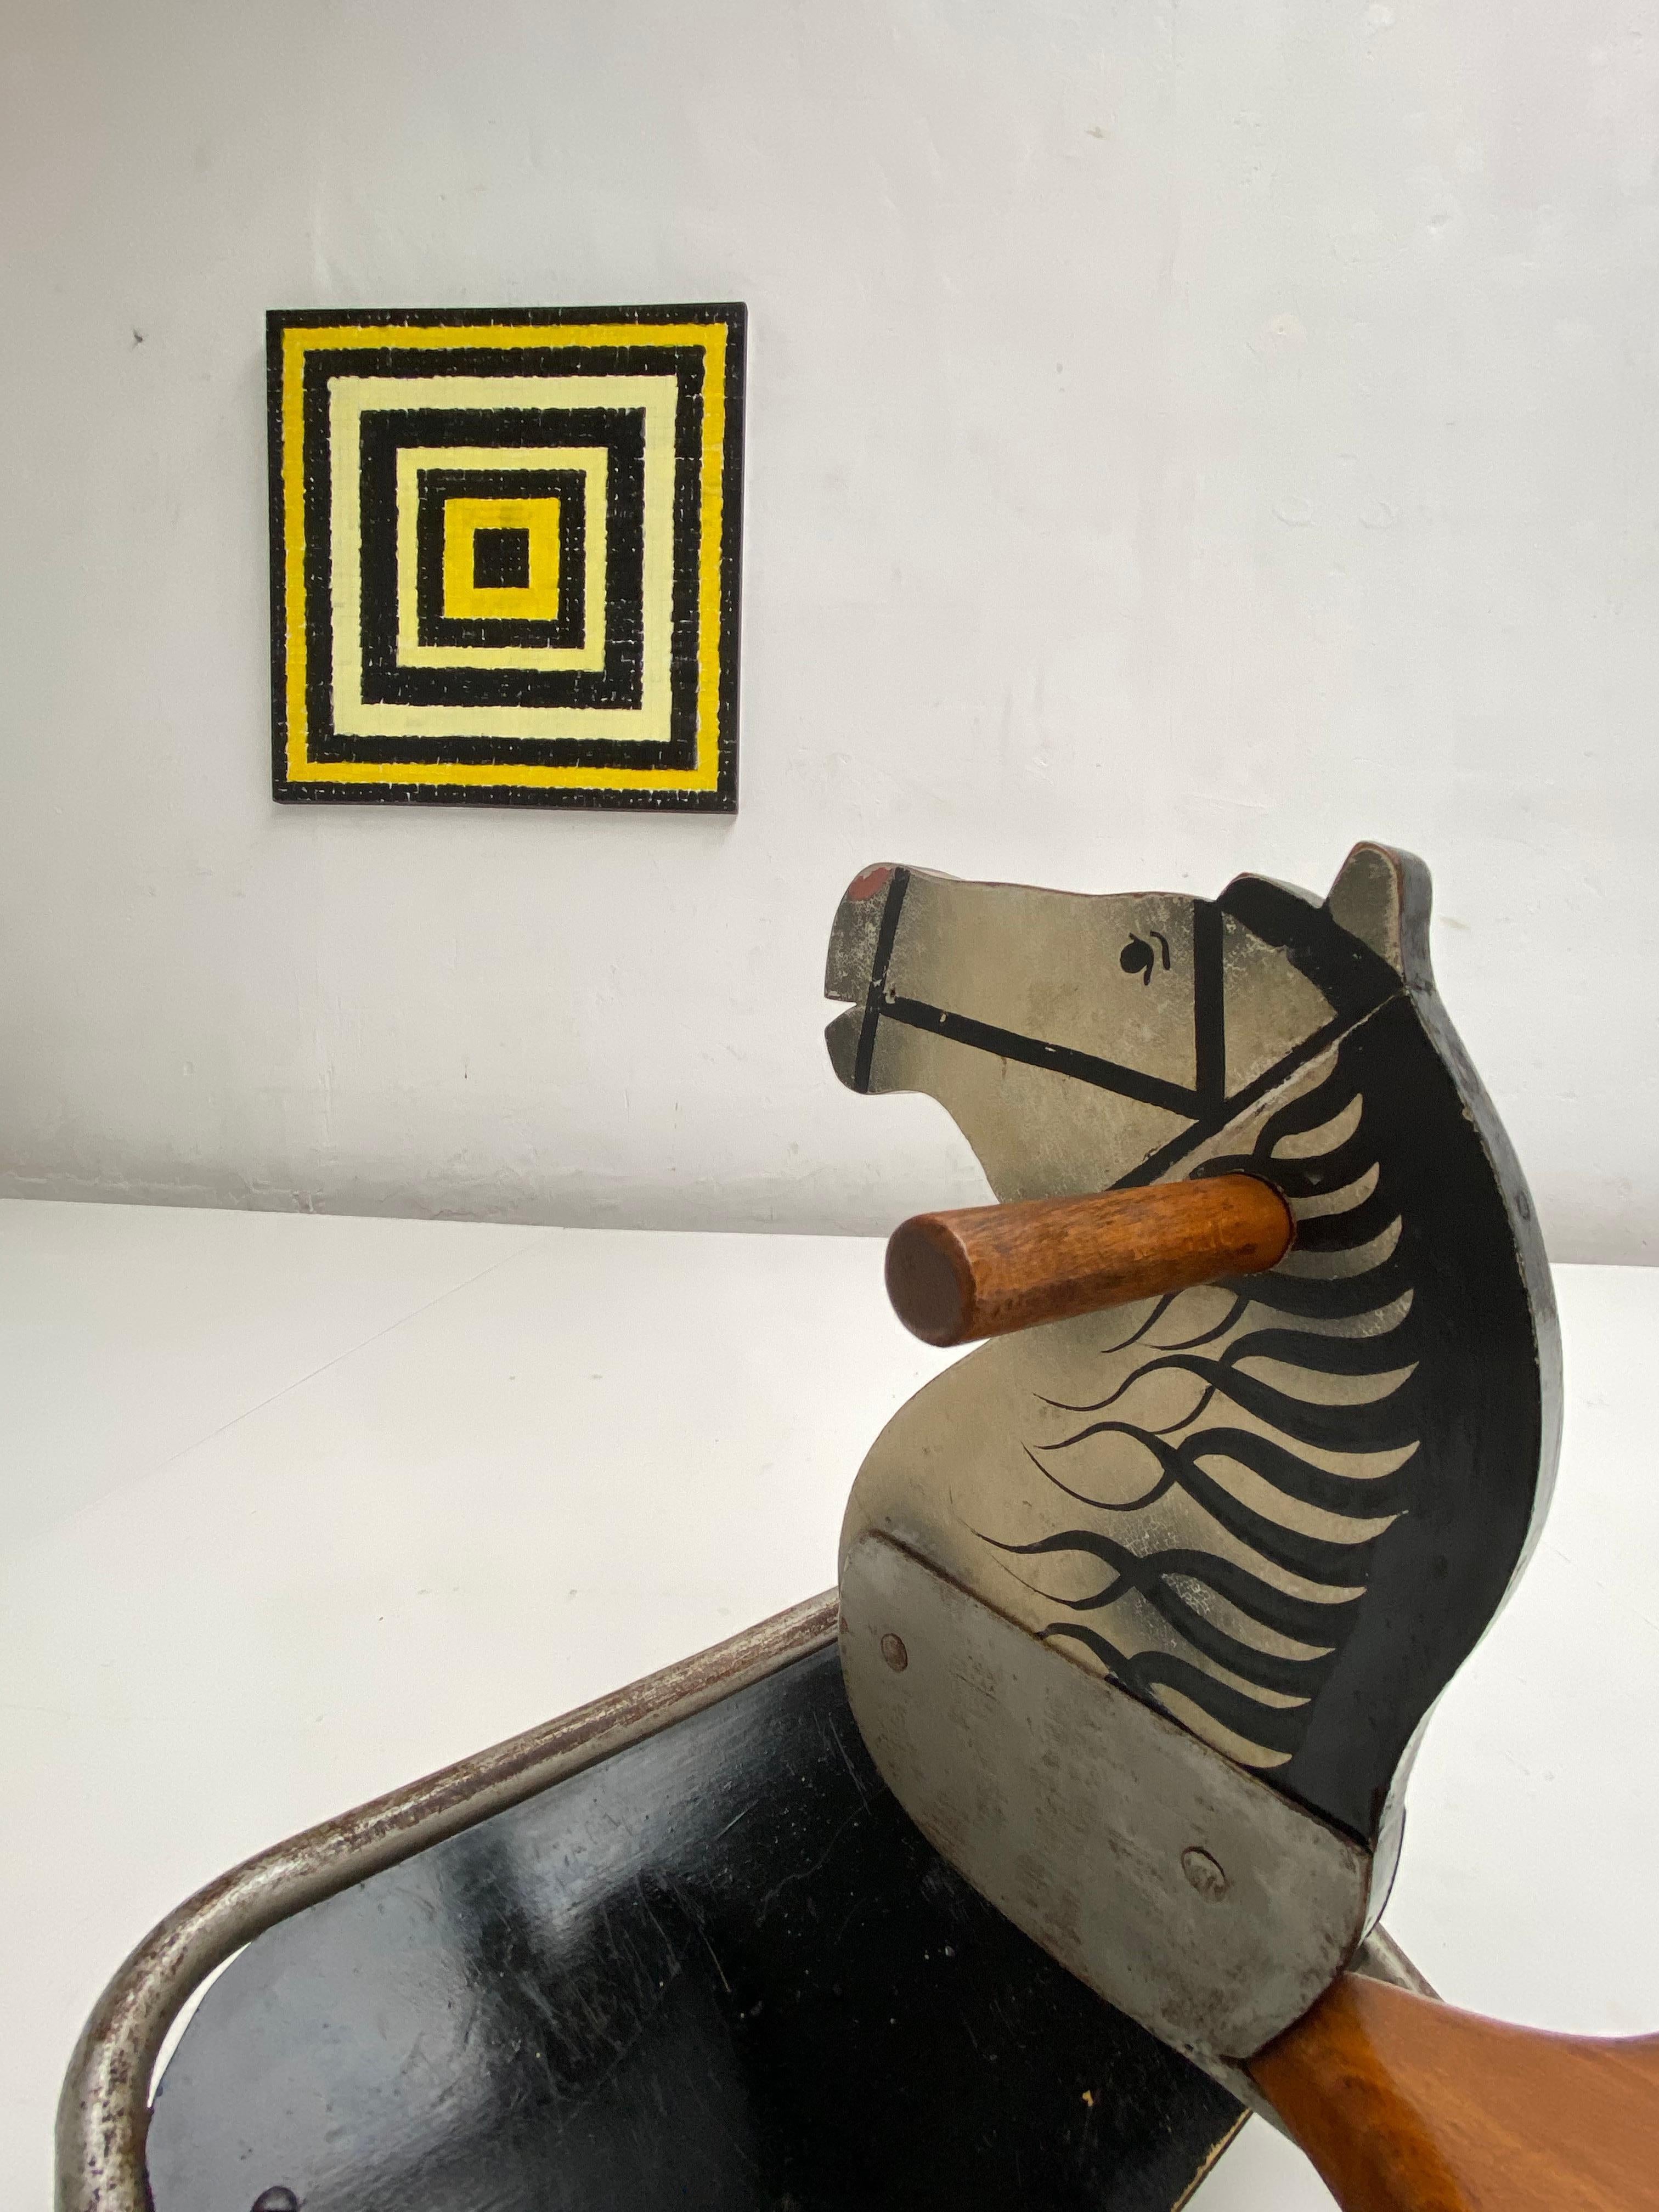 Very nice and original vintage condition rocking horse in Bauhaus style, circa 1940.

This rocking horse was made to last

All handmade in Solid round metal and solid wood seating with a beautifully painted horse head

Nice detail are the old